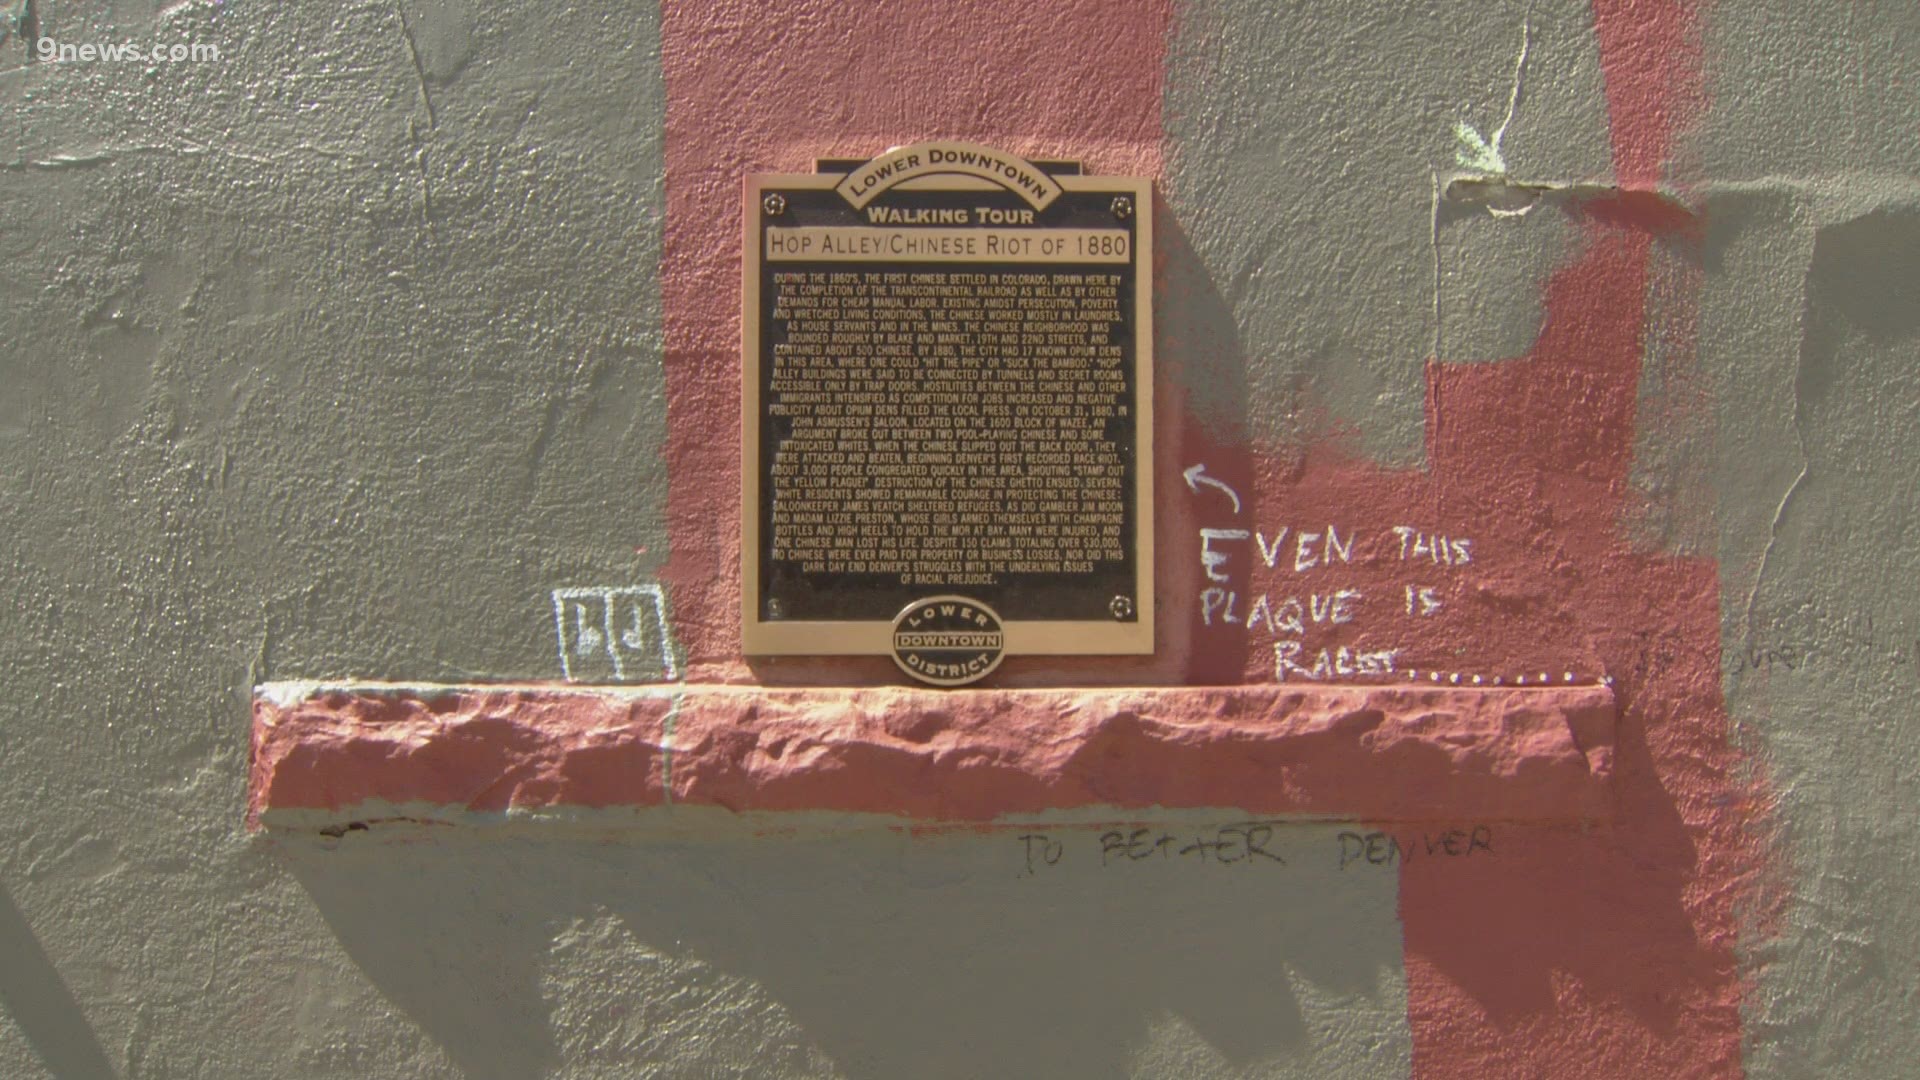 The group hopes to have a historic plaque removed from lower downtown as they begin their efforts to revitalize and recognize what was once Denver's Chinatown.